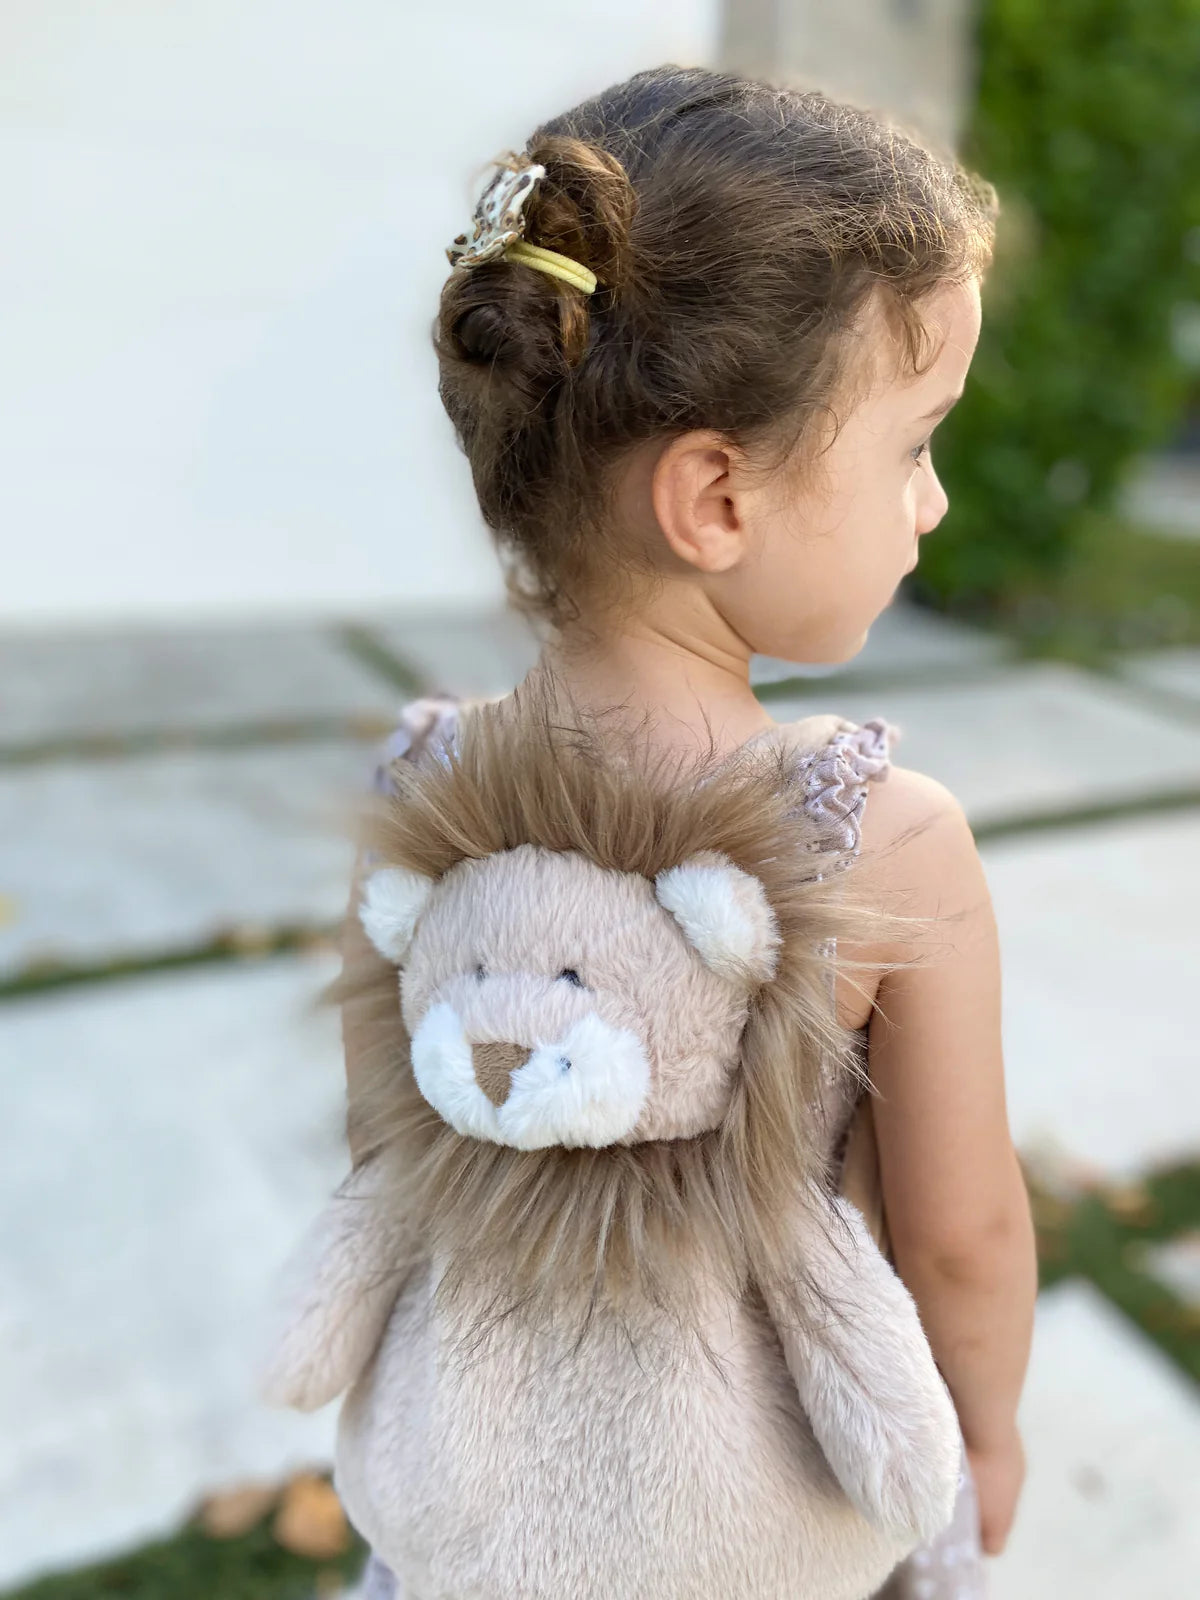 Zuri The Lion Backpack